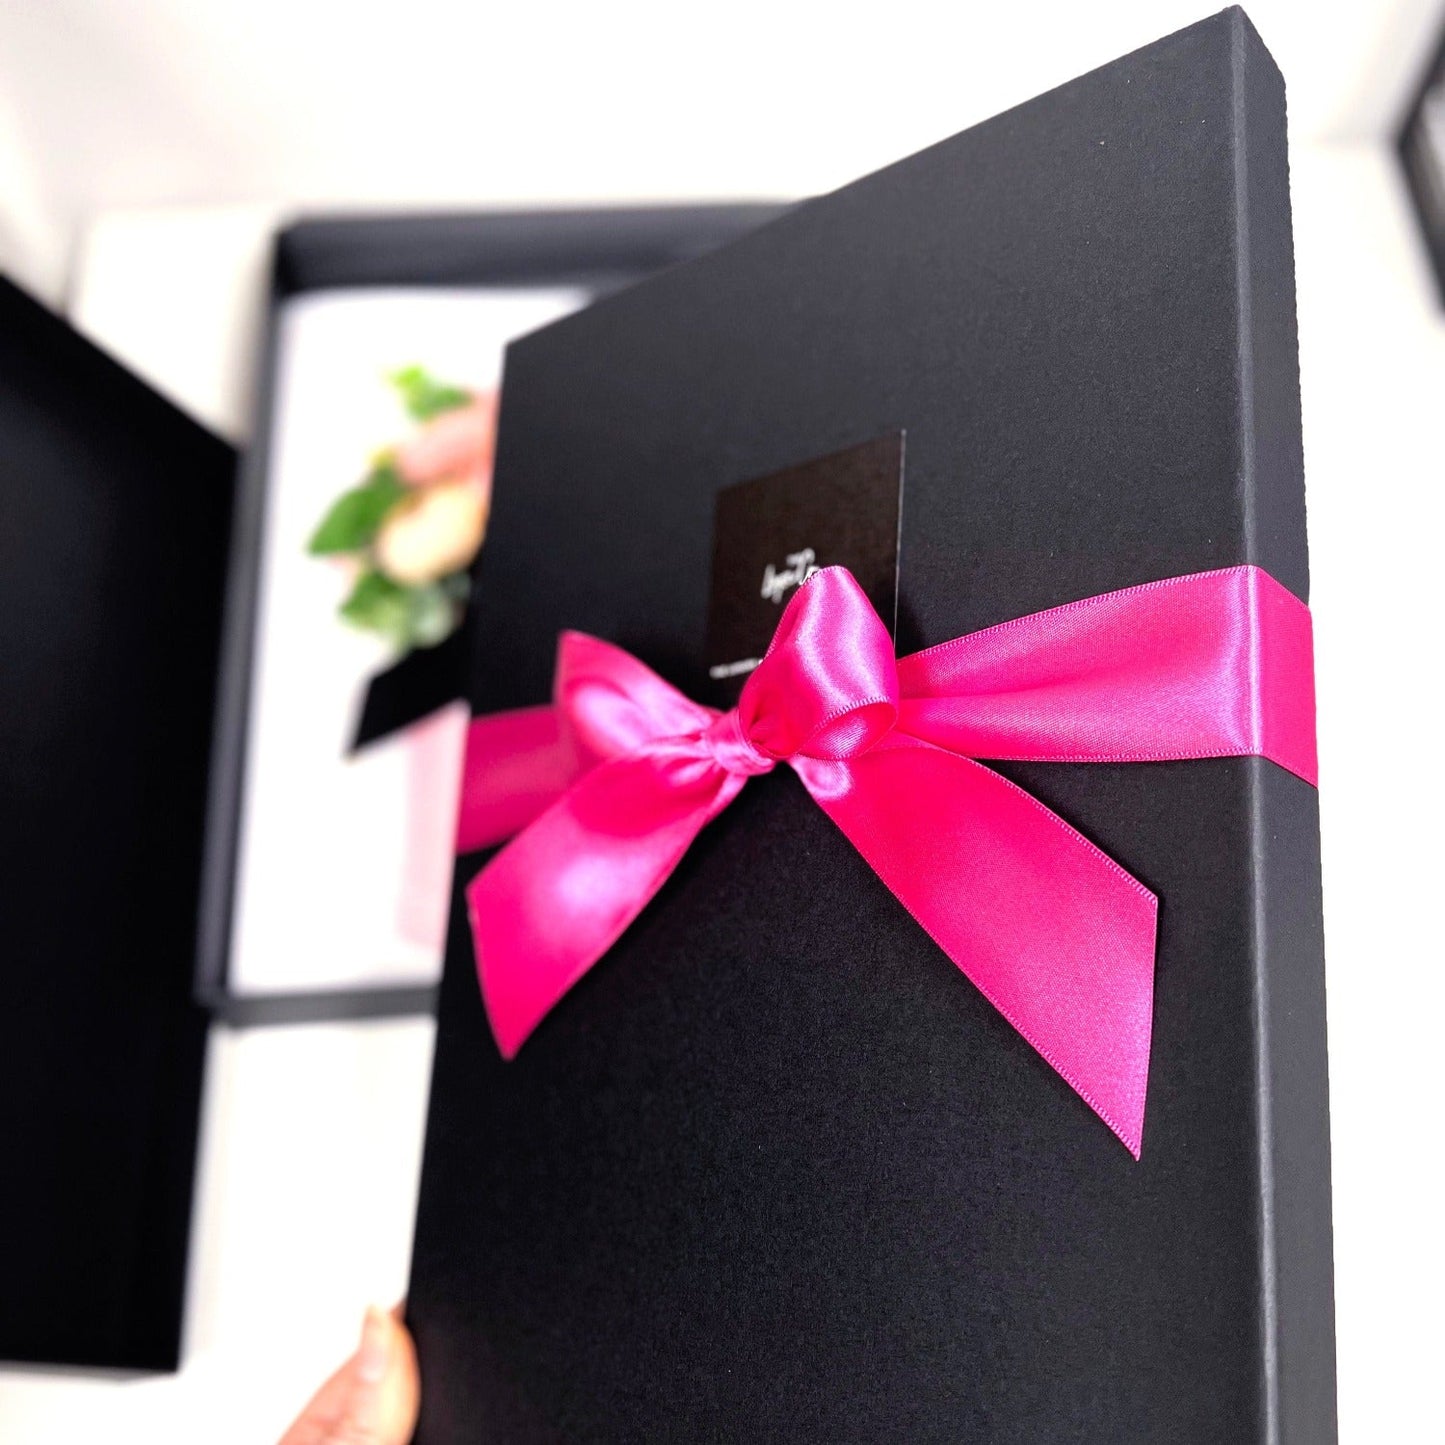 Leather Birthday cards come boxed in luxury 2 piece gift box tied with satin bow in your colour choice